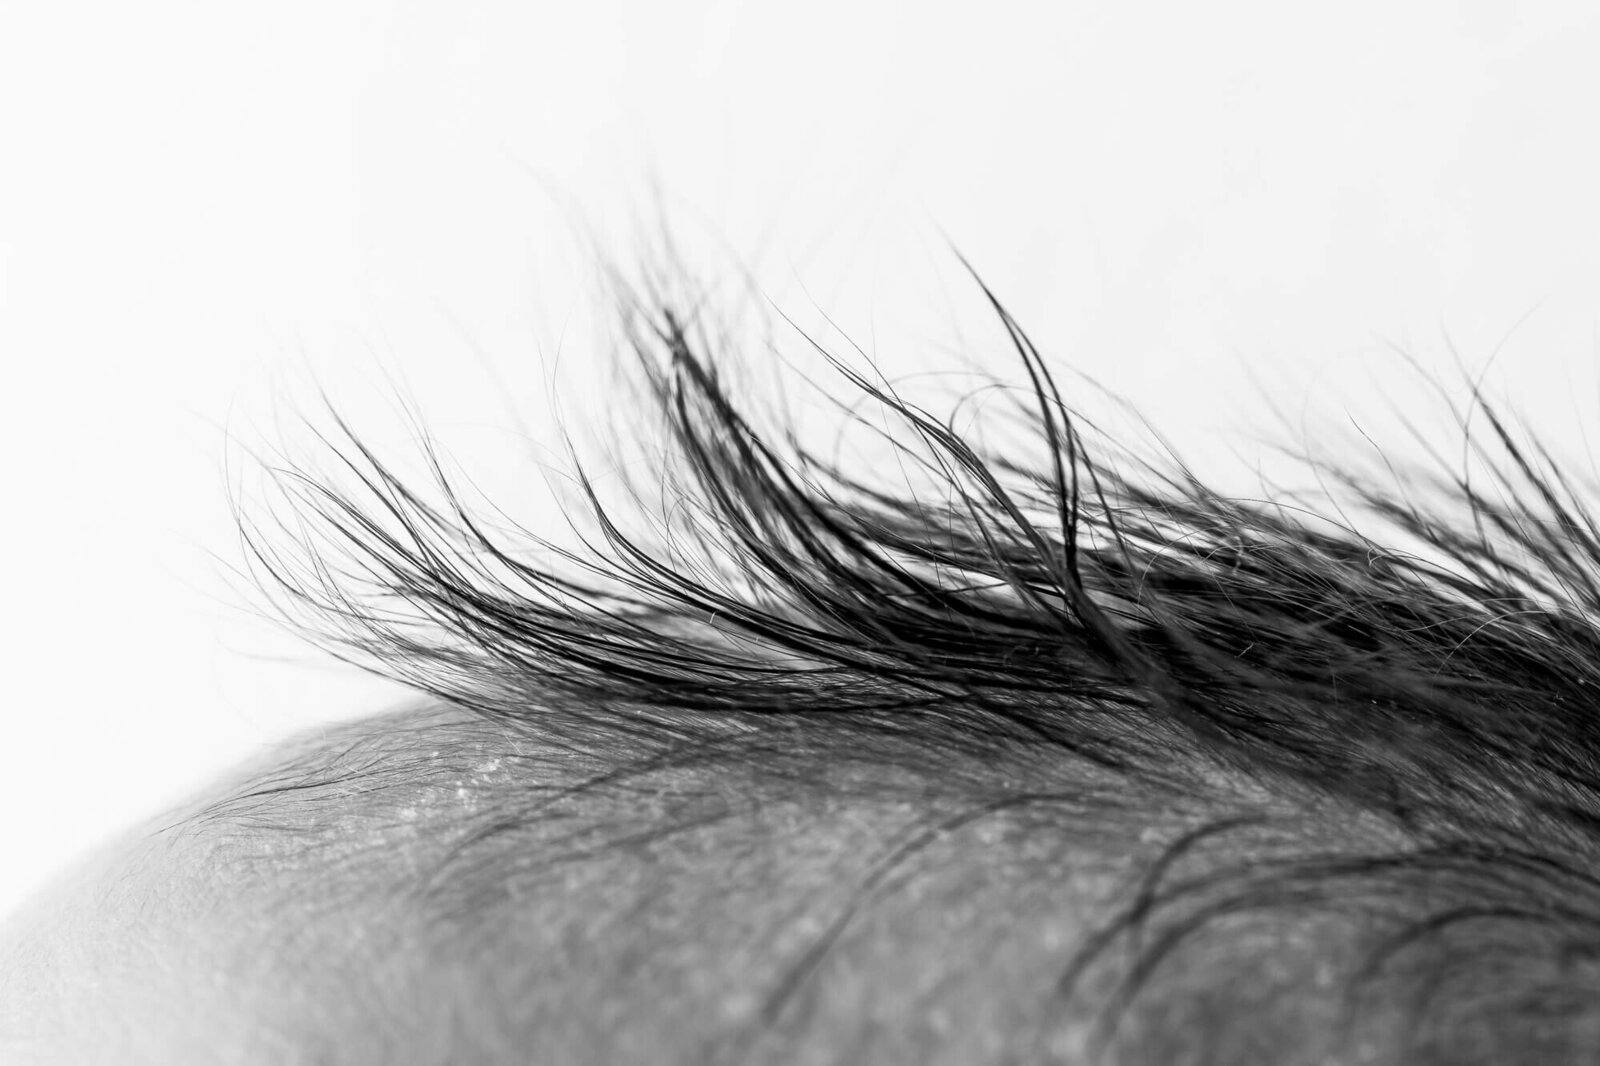 close-up black and white photograph of newborn hair whisp